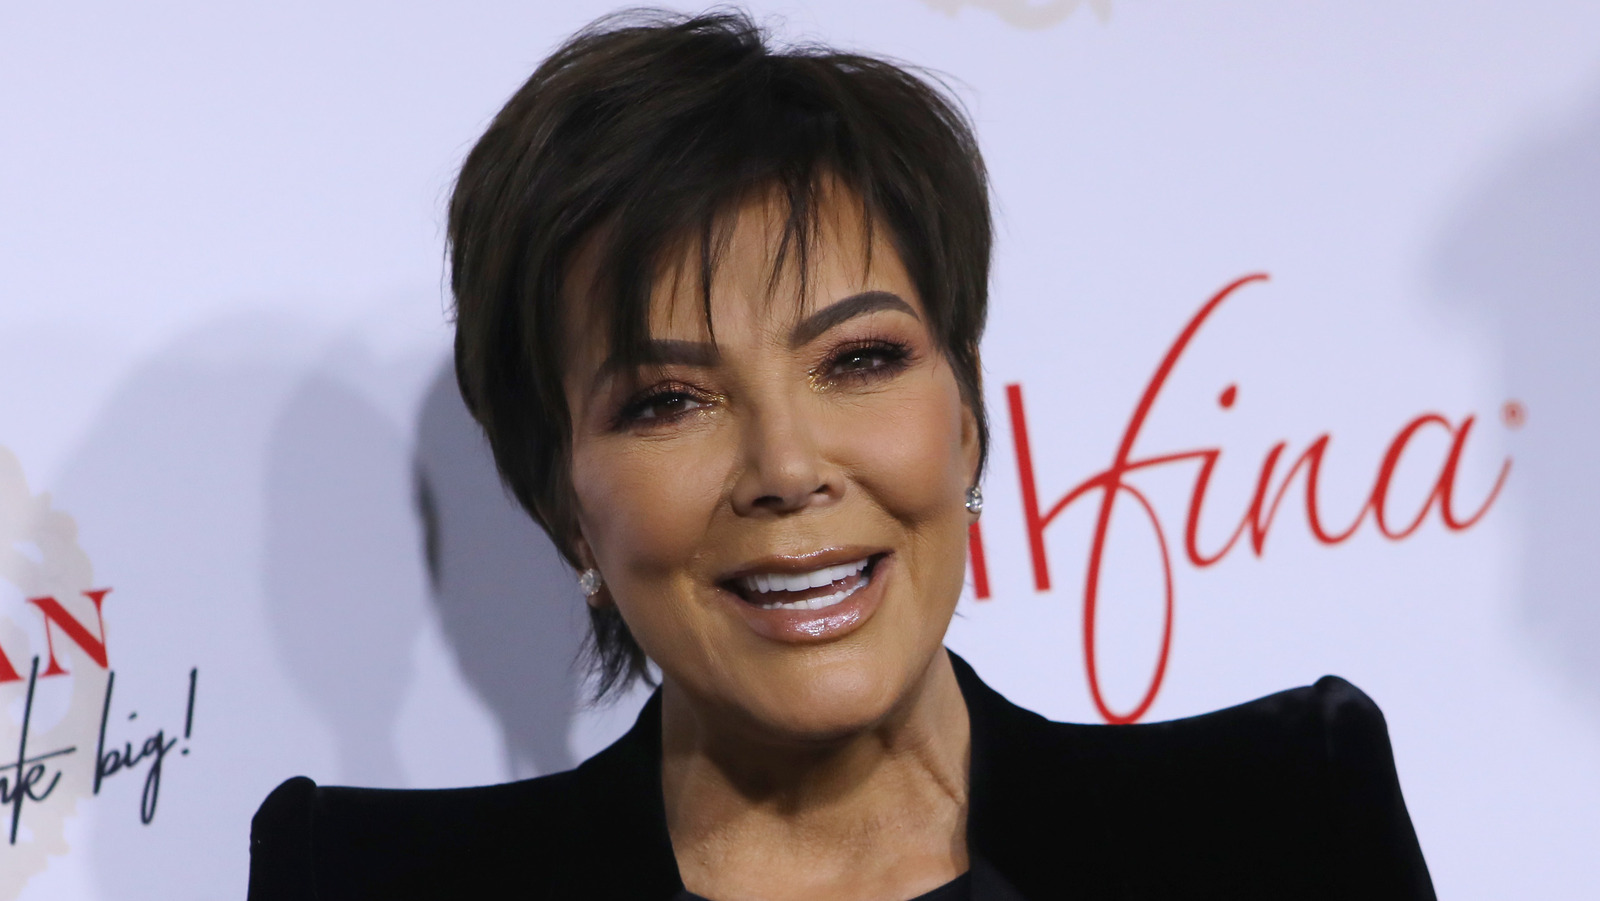 Kris Jenner's New Look Stirred Up Some Ruthless Comments From Fans